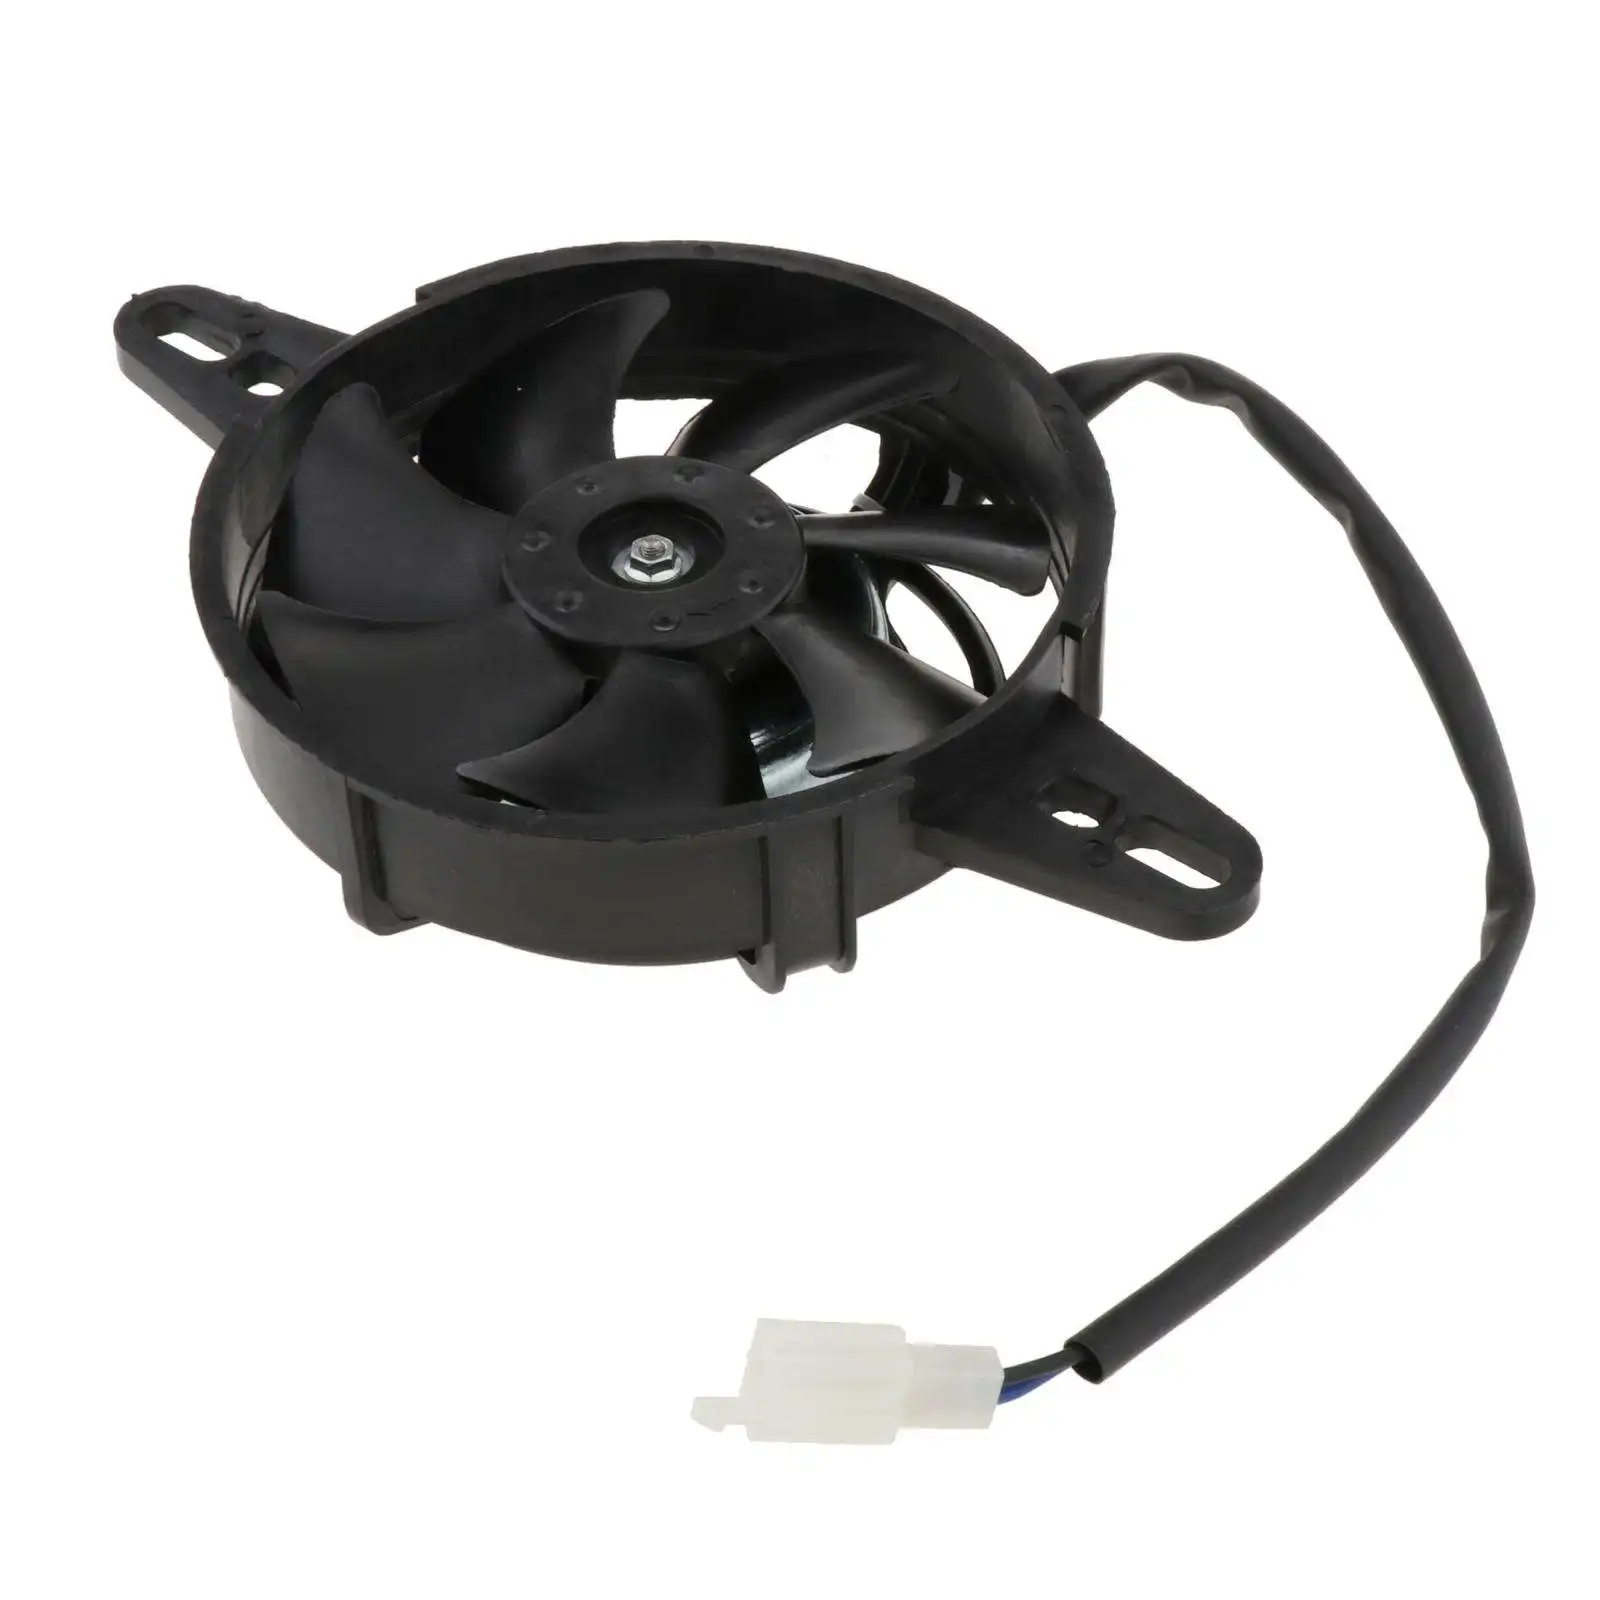 Electric Engine Radiator Cooling Fan for 150CC 200CC 250CC ATV,High Revolving Speed